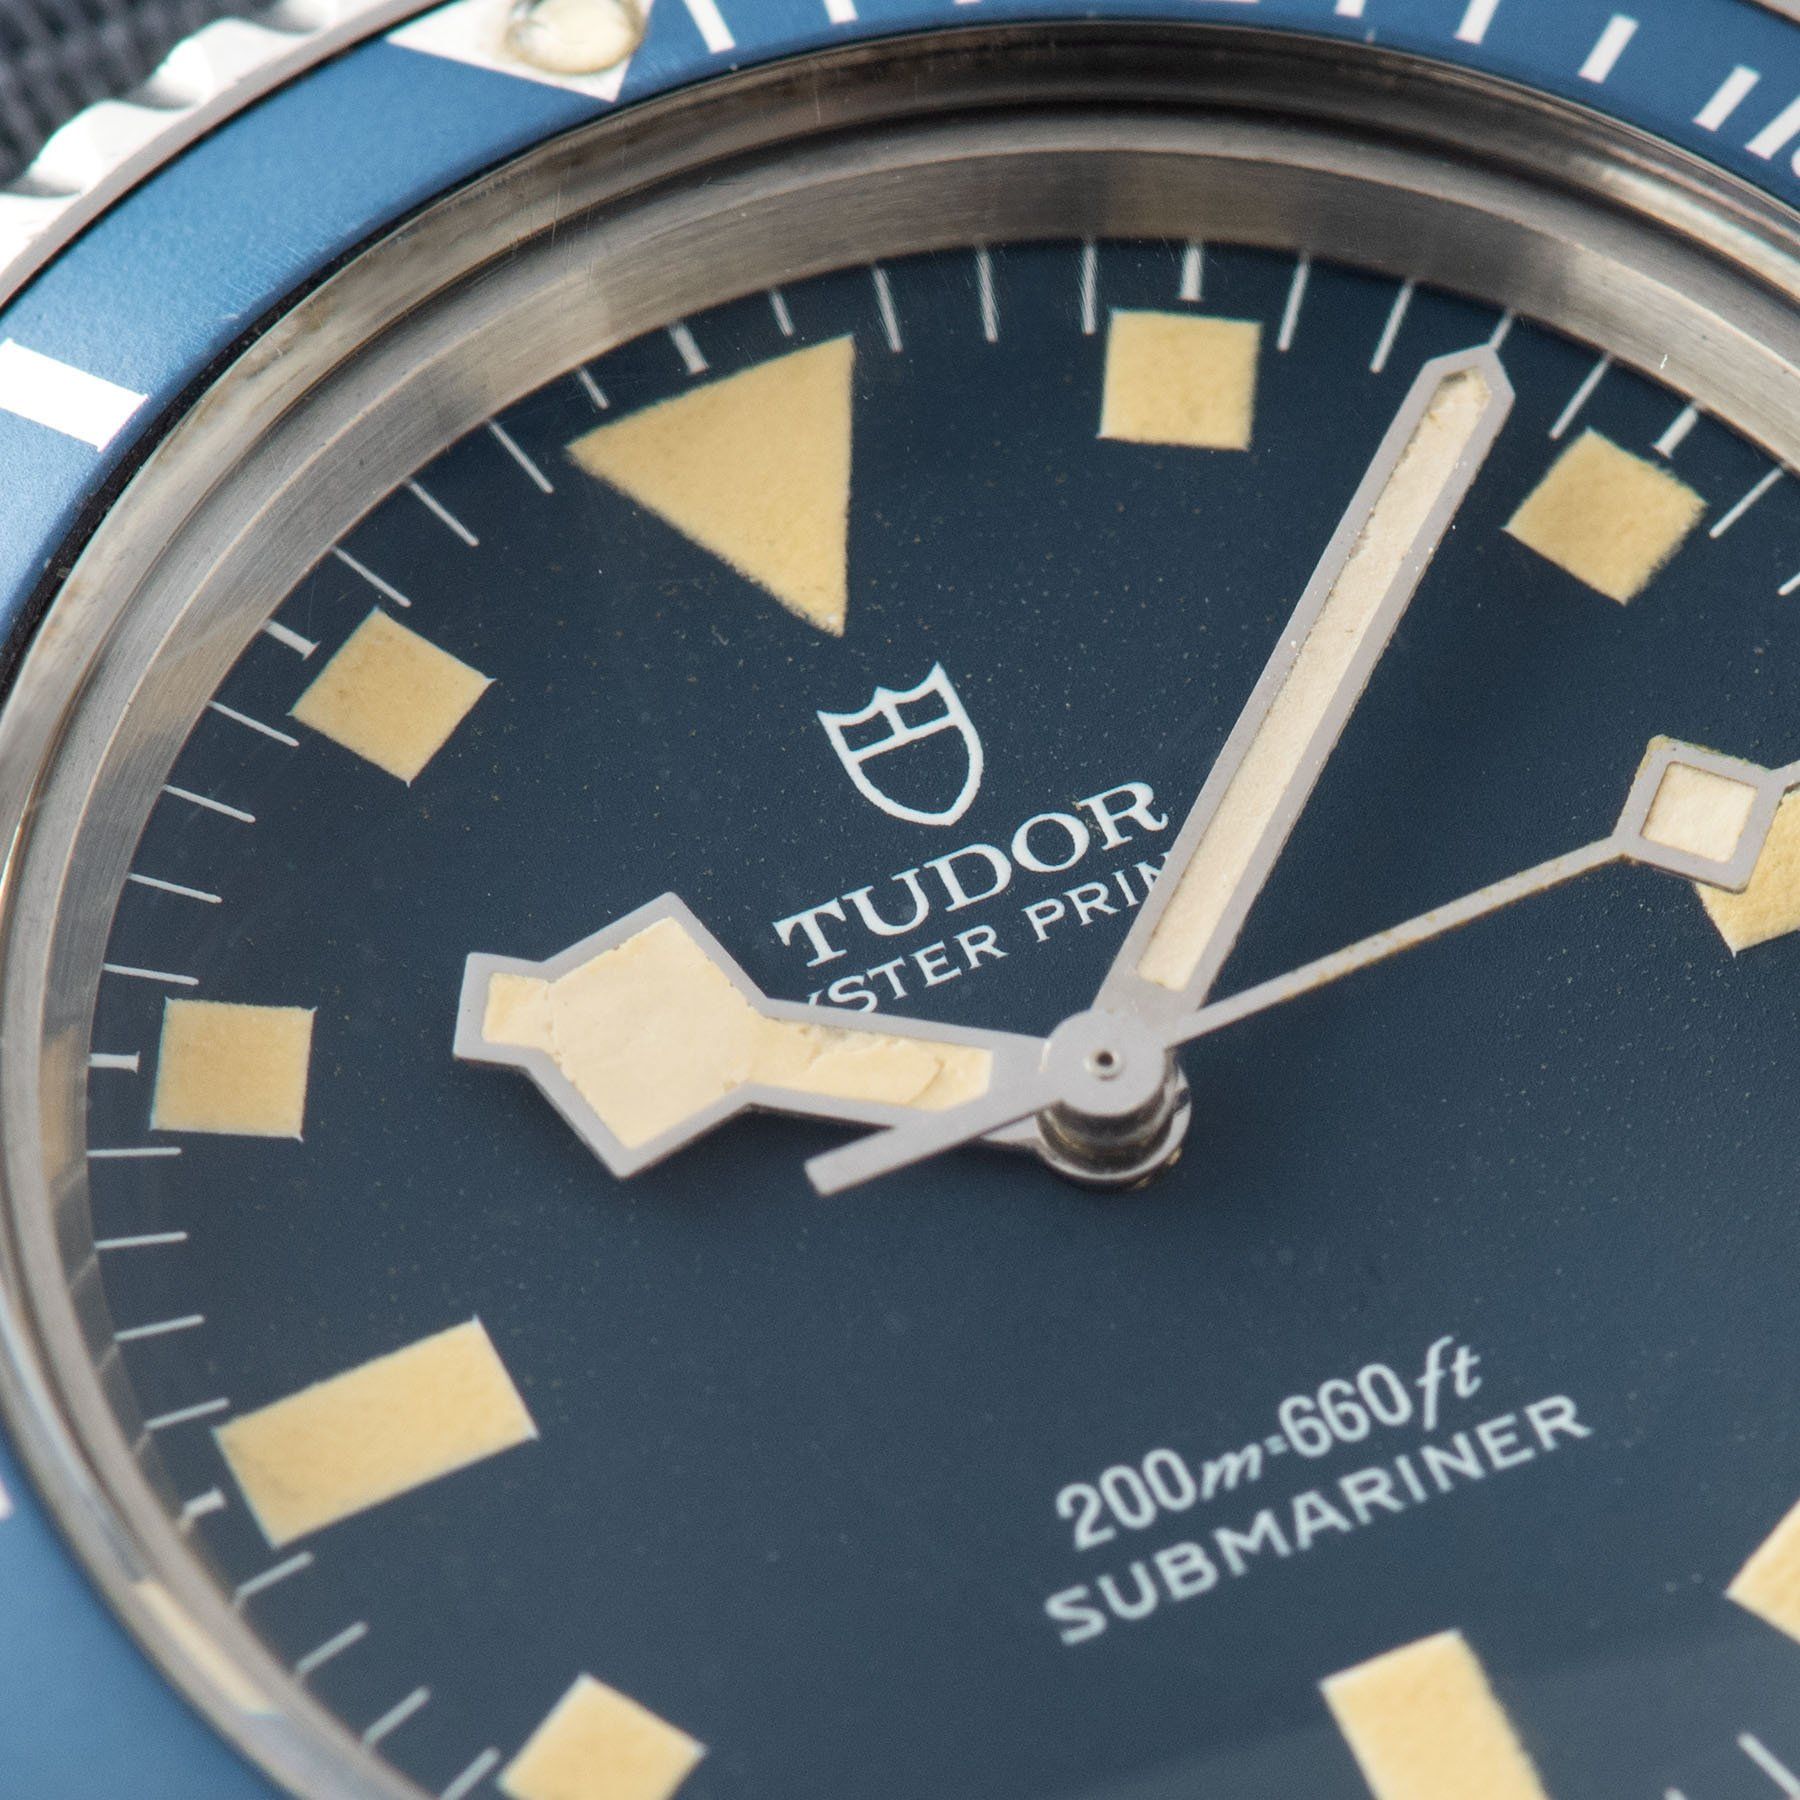 Tudor Marine Nationale MN78 Submariner 9401 with Papers